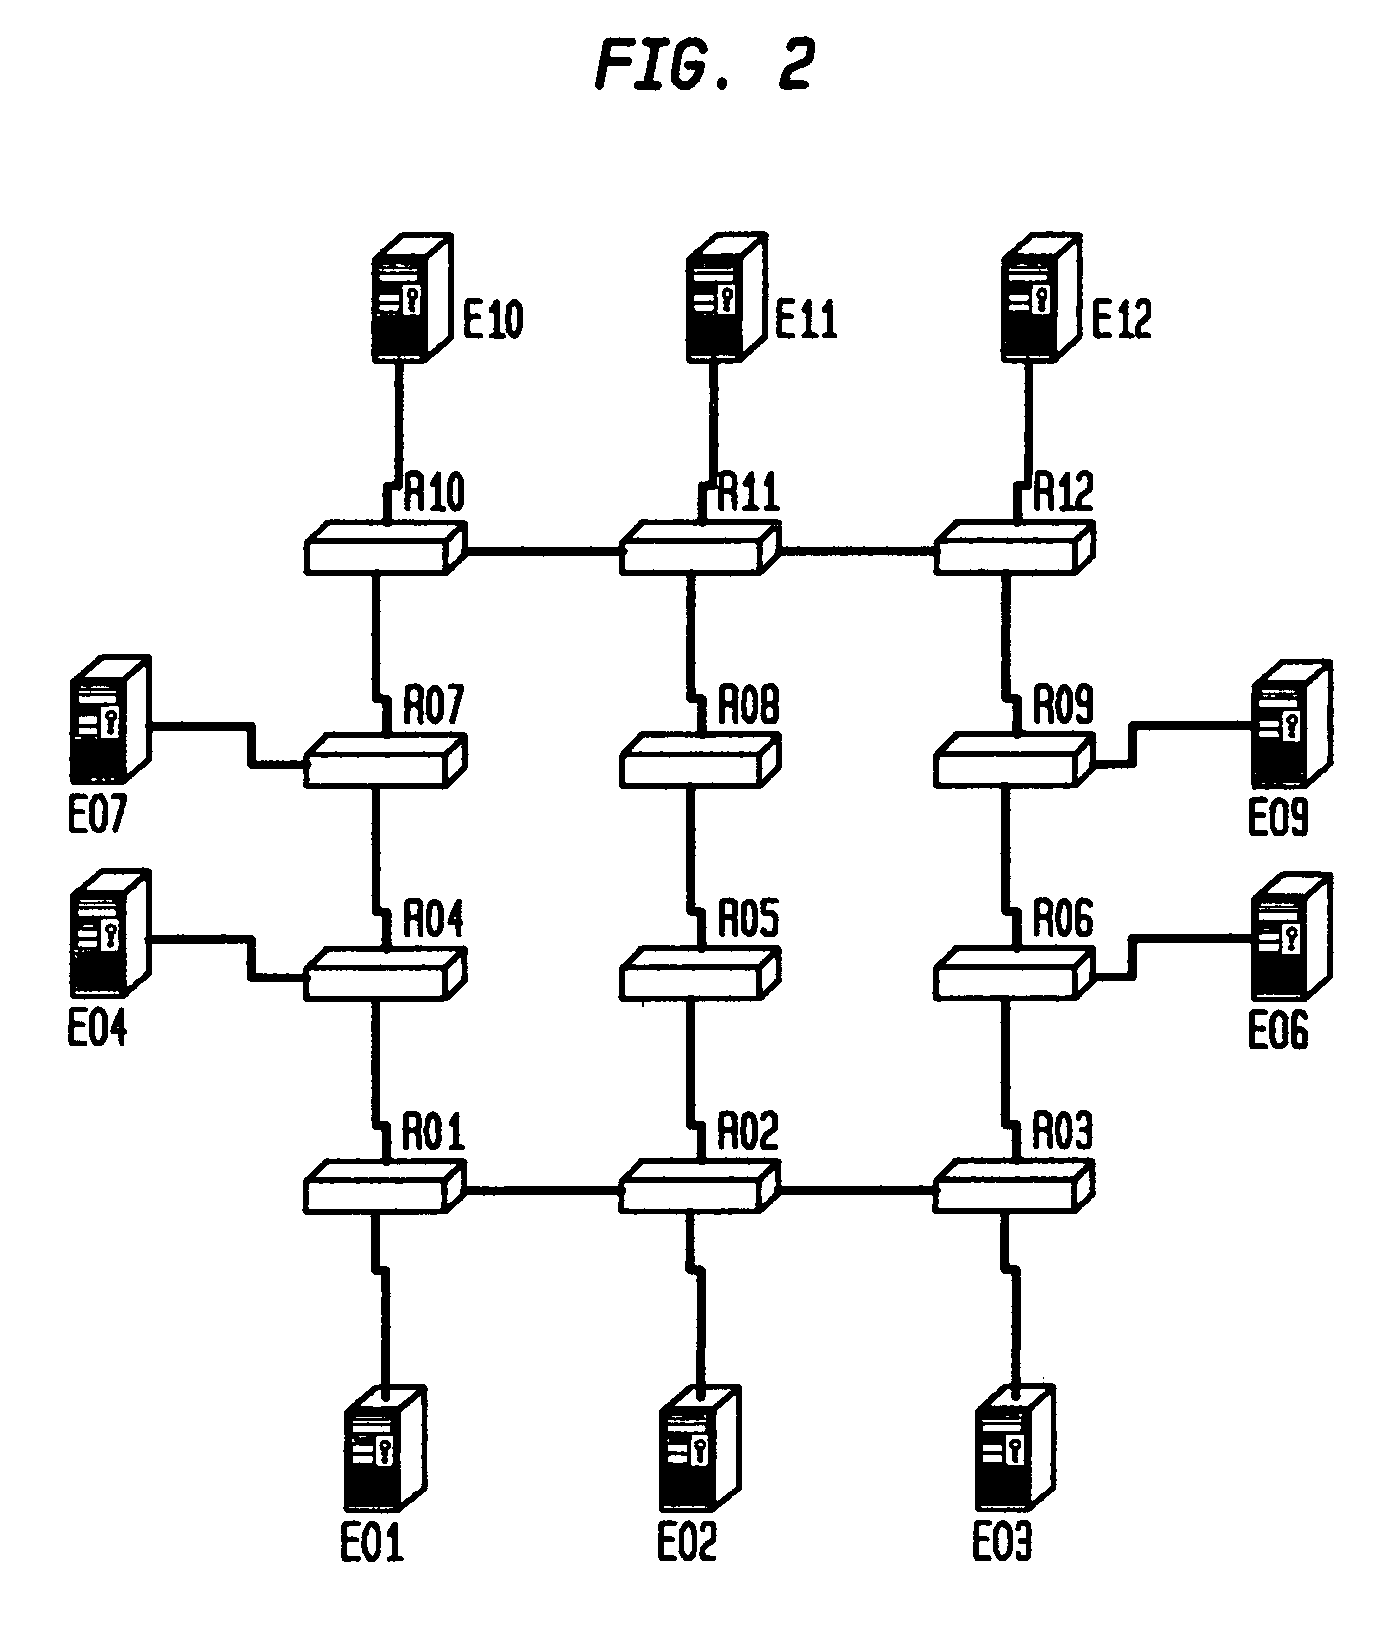 Method and apparatus for determining monitoring locations in distributed systems